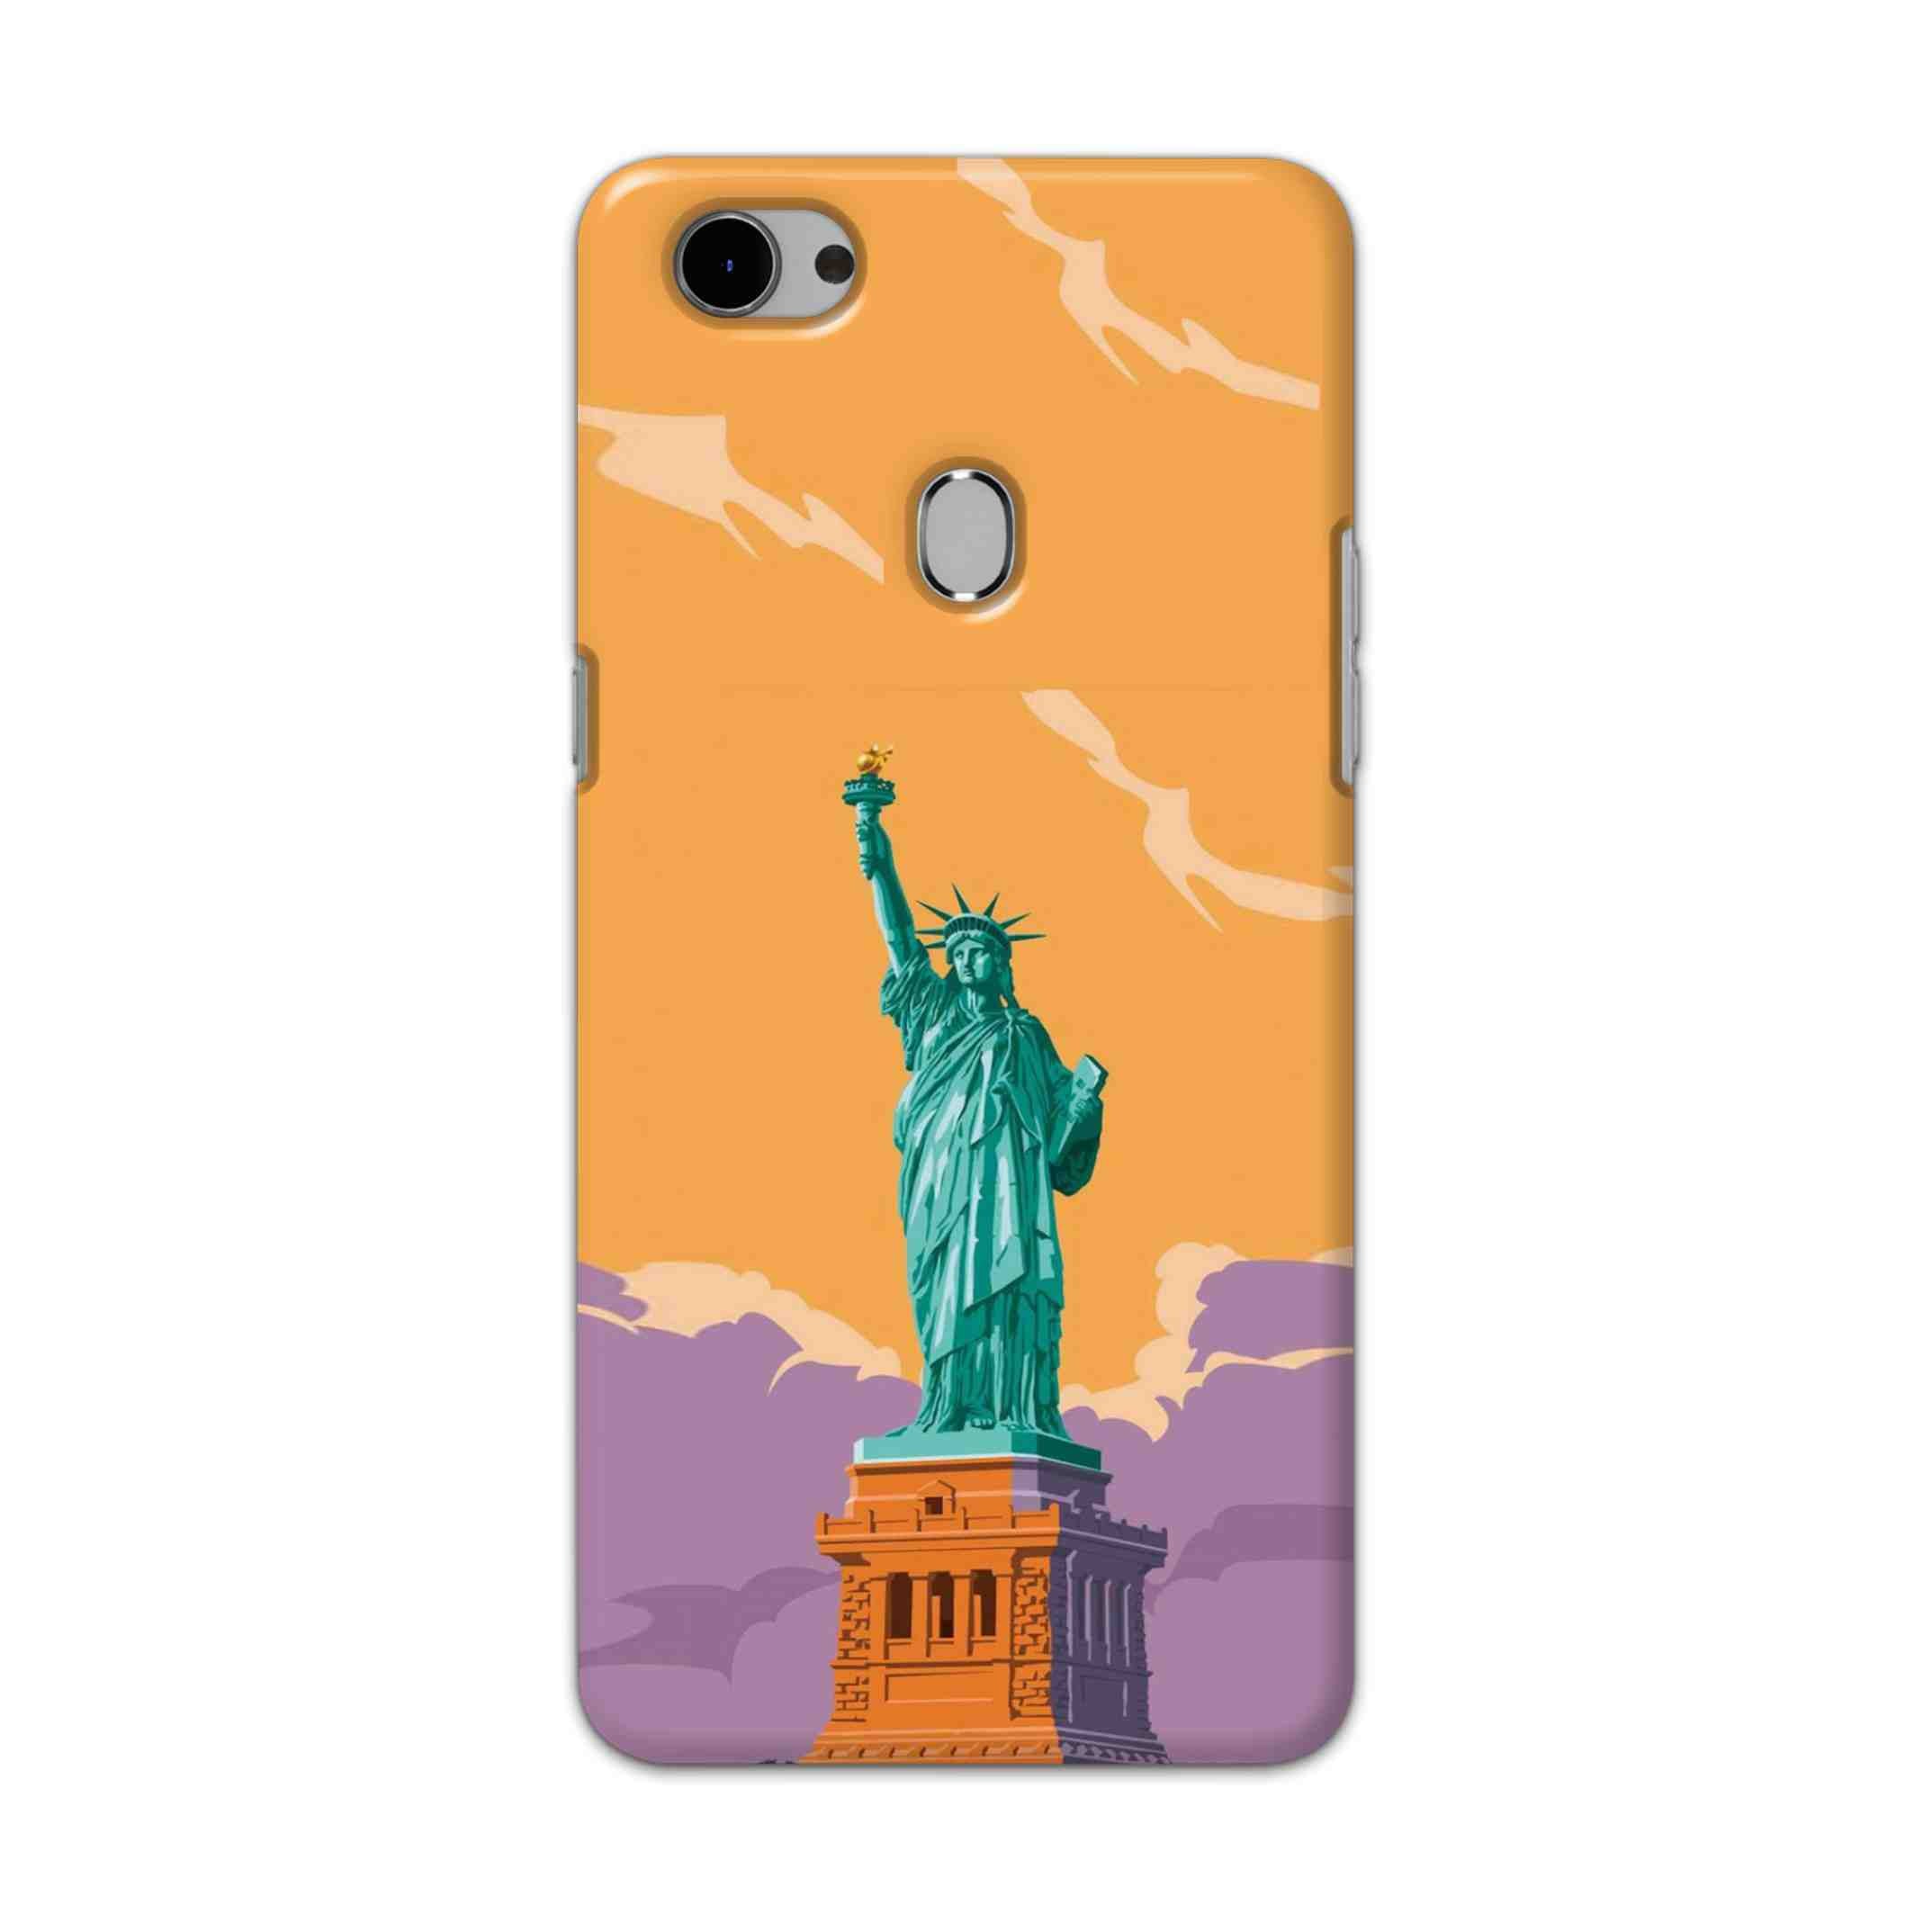 Buy Statue Of Liberty Hard Back Mobile Phone Case Cover For Oppo F7 Online